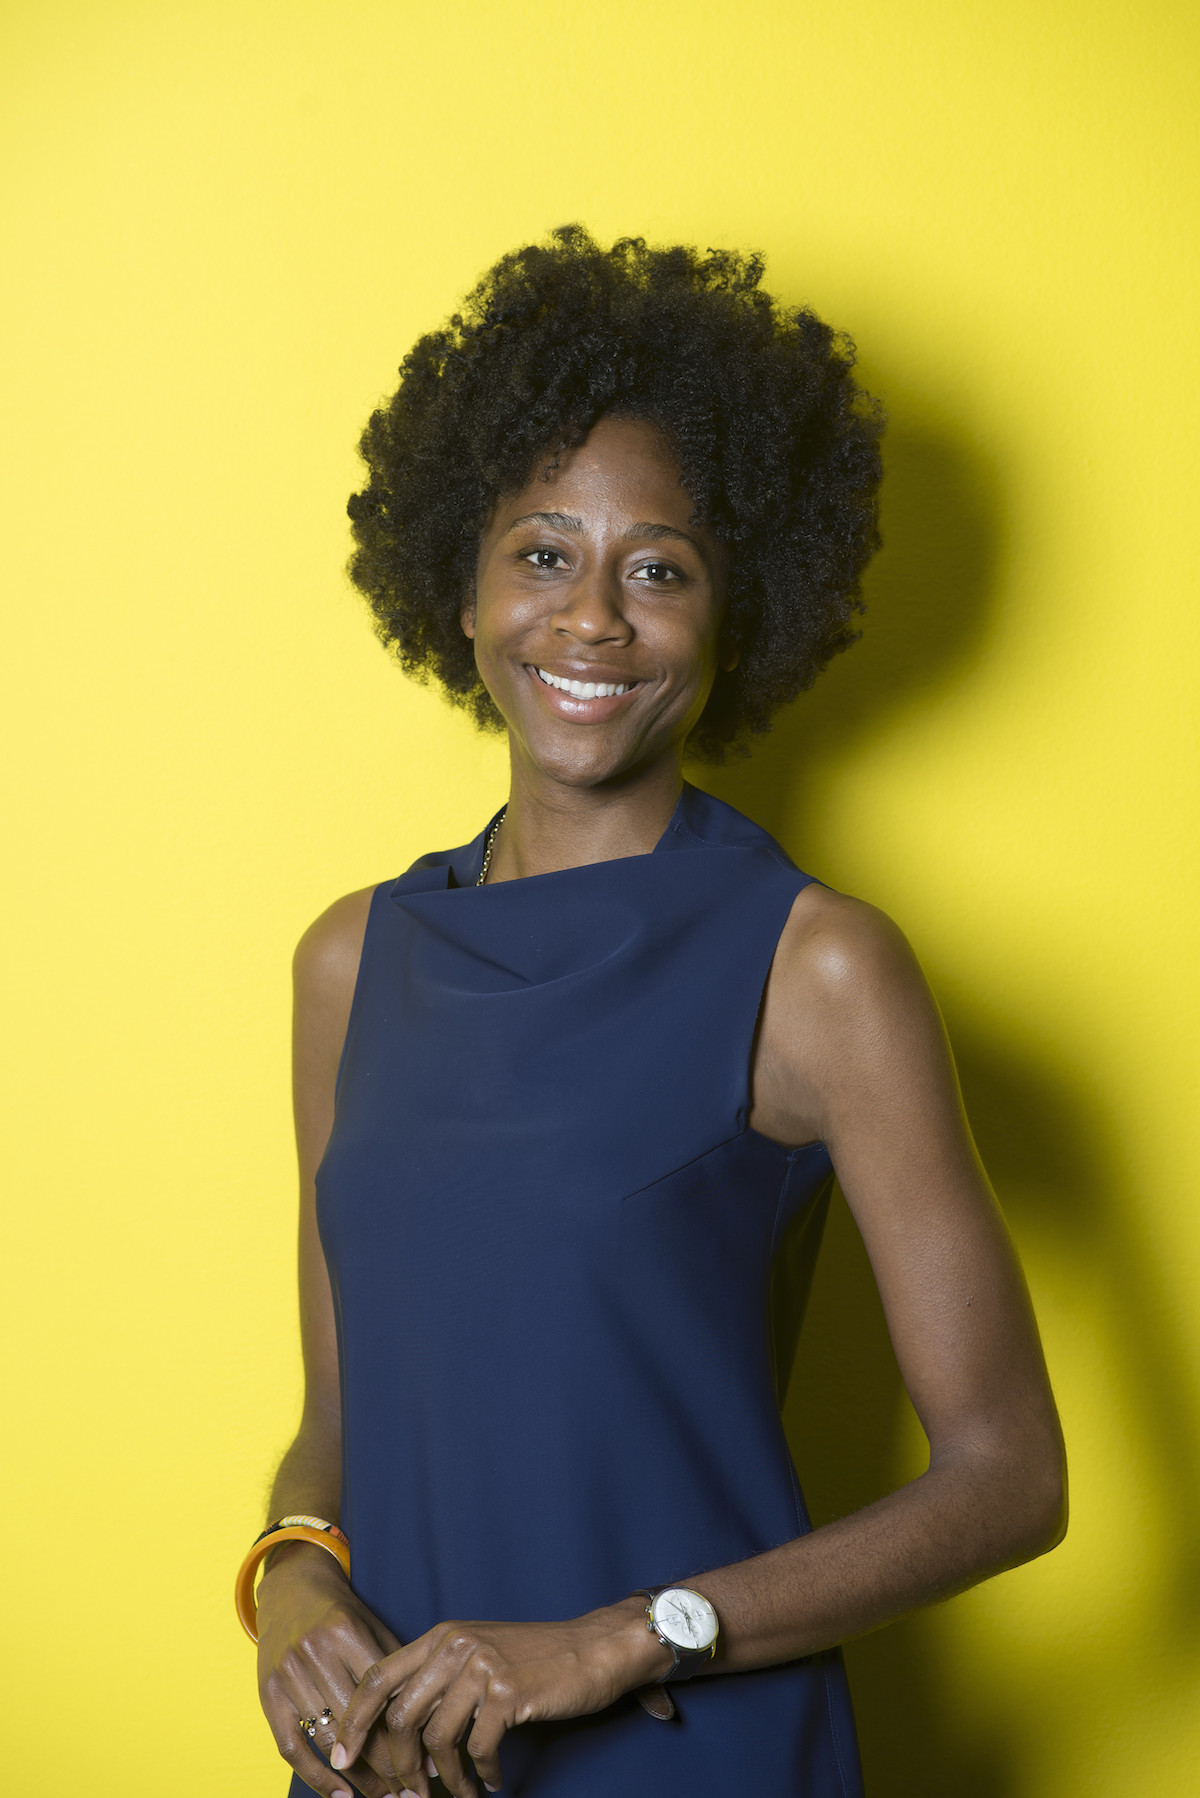 Naomi Beckwith is the new deputy director and chief curator of the Solomon R. Guggenheim Museum